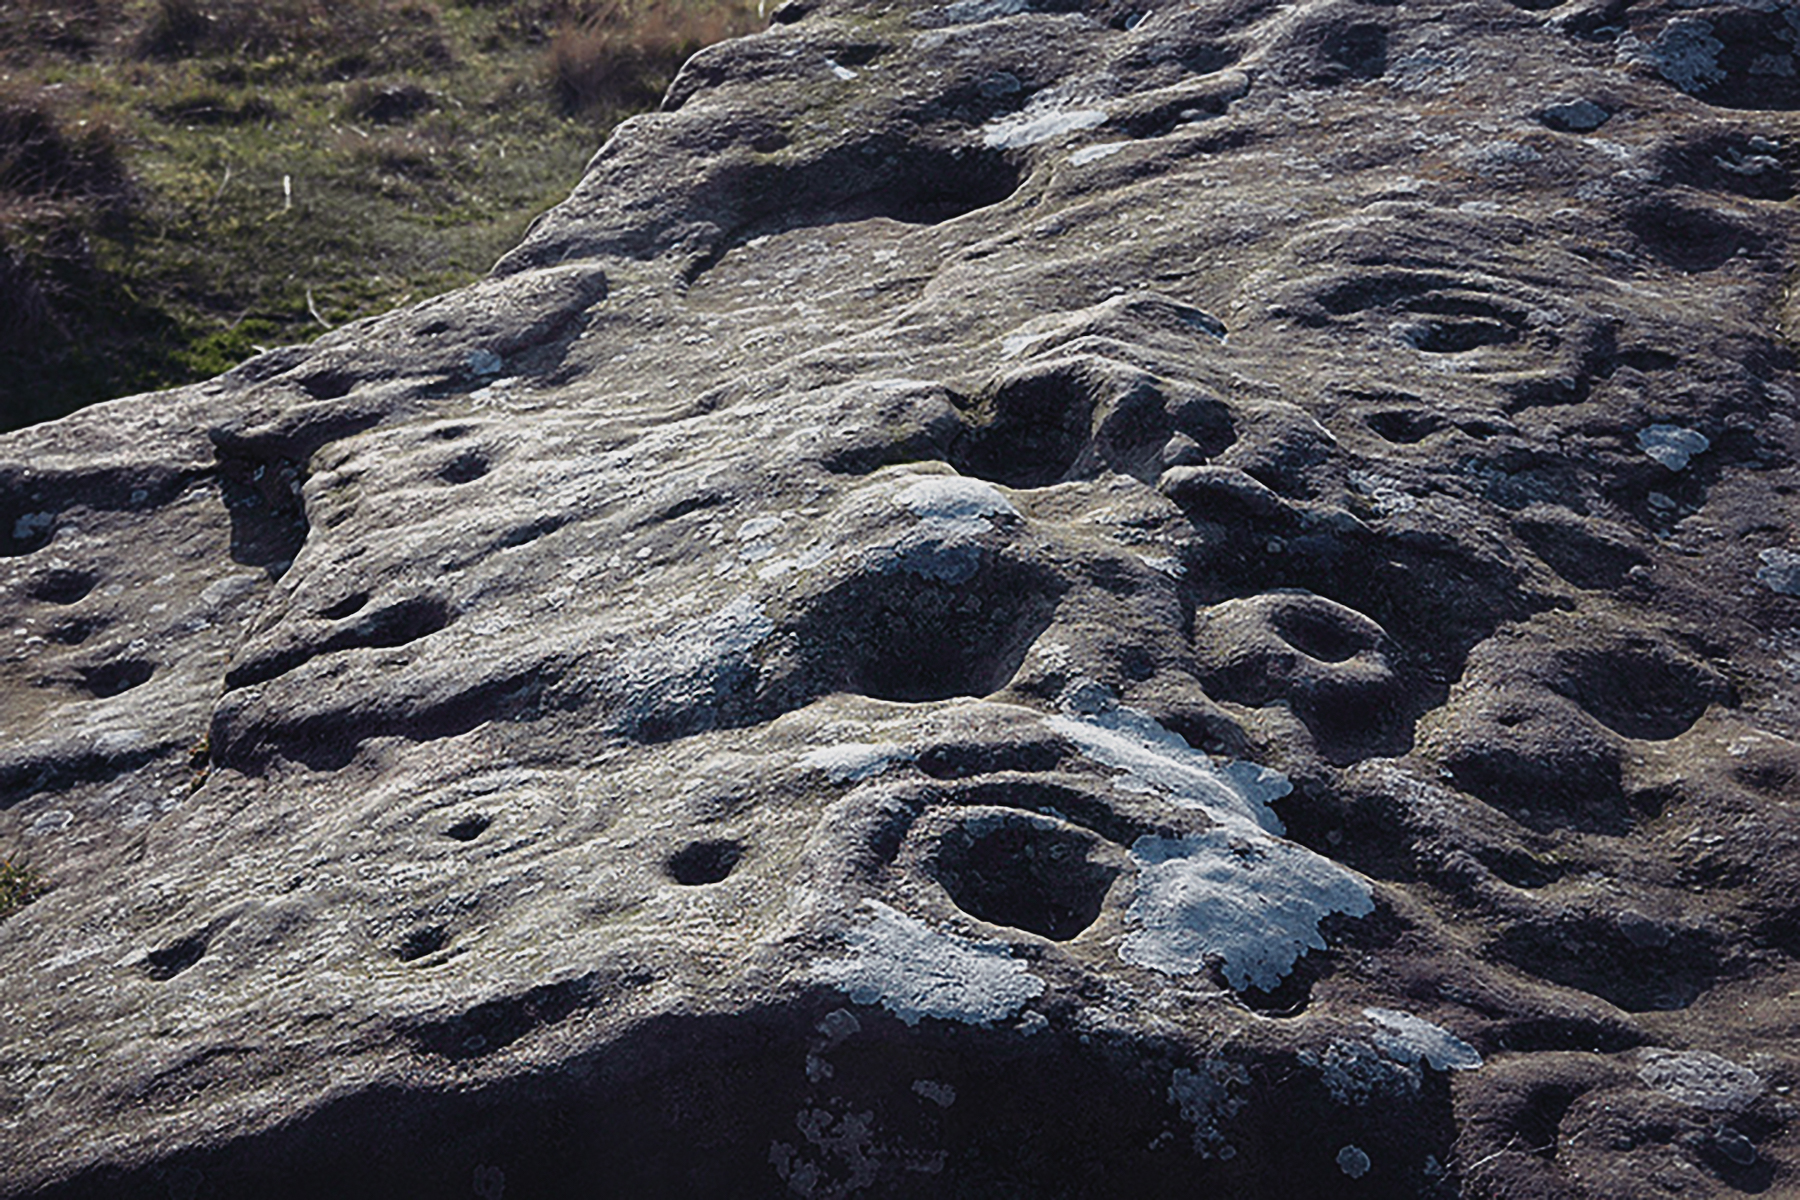 A variety of tools were used to create the Northumberland rock carvings